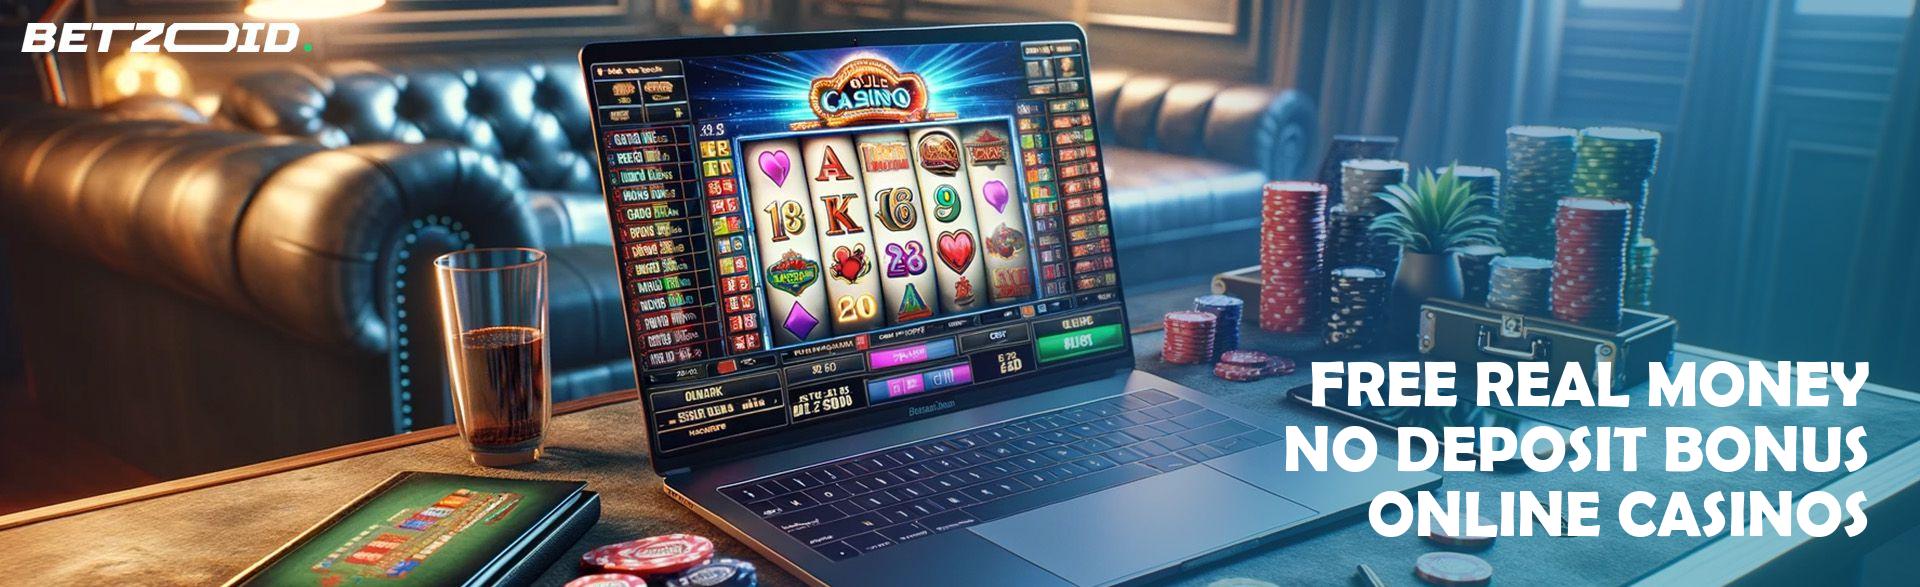 Open Mike on The Challenges of Advertising Online Gambling Services in Turkey